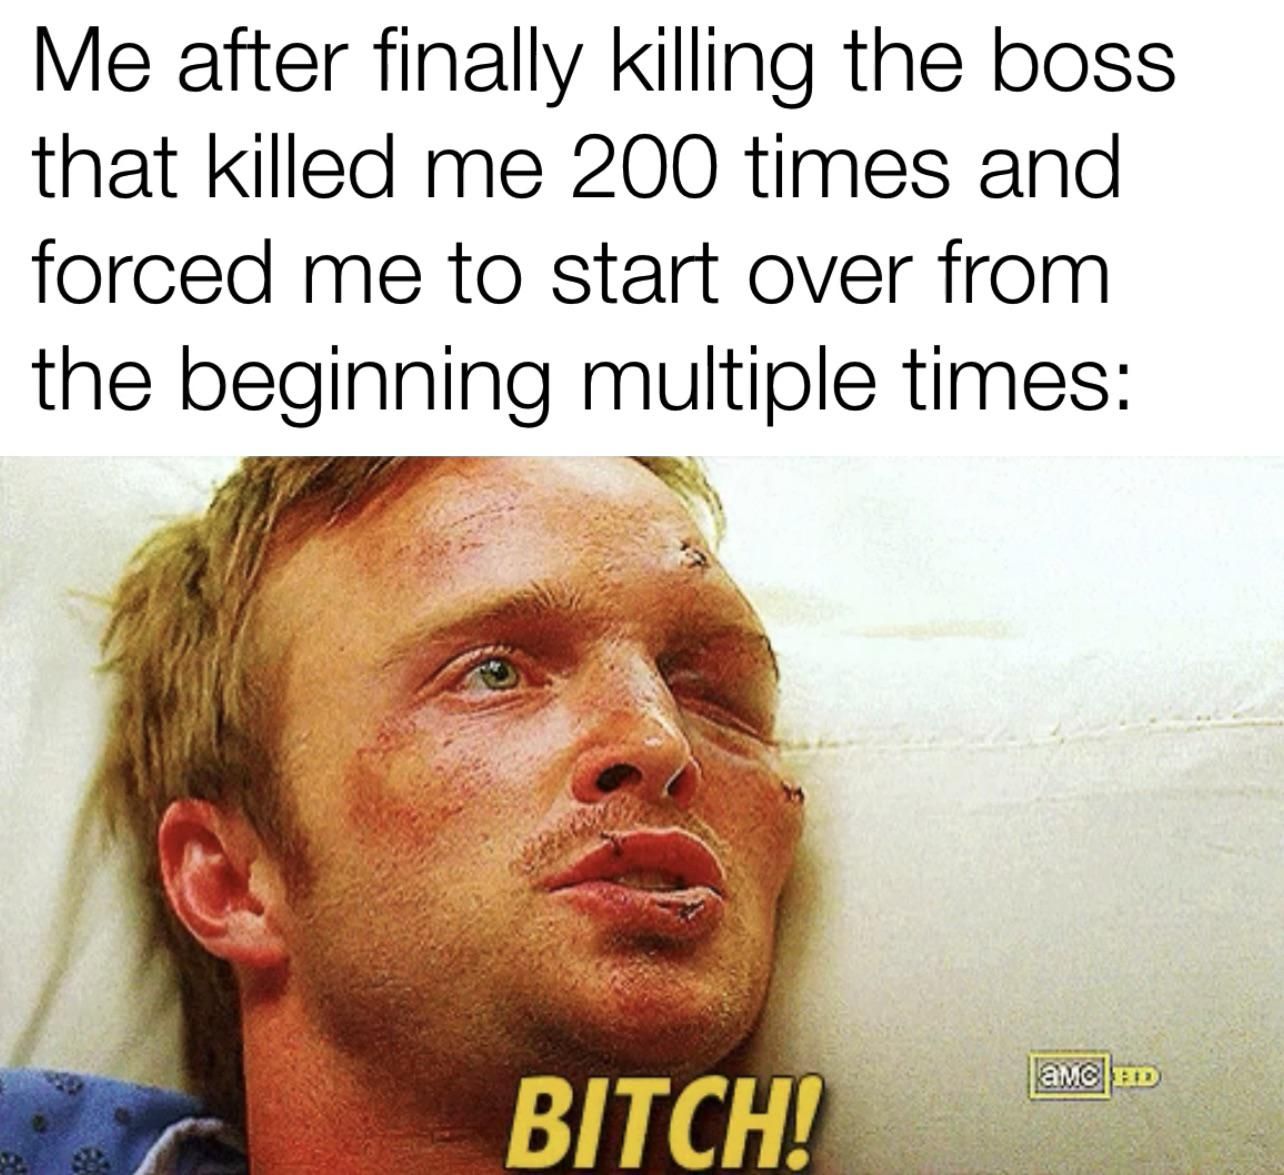 I’m the boss now